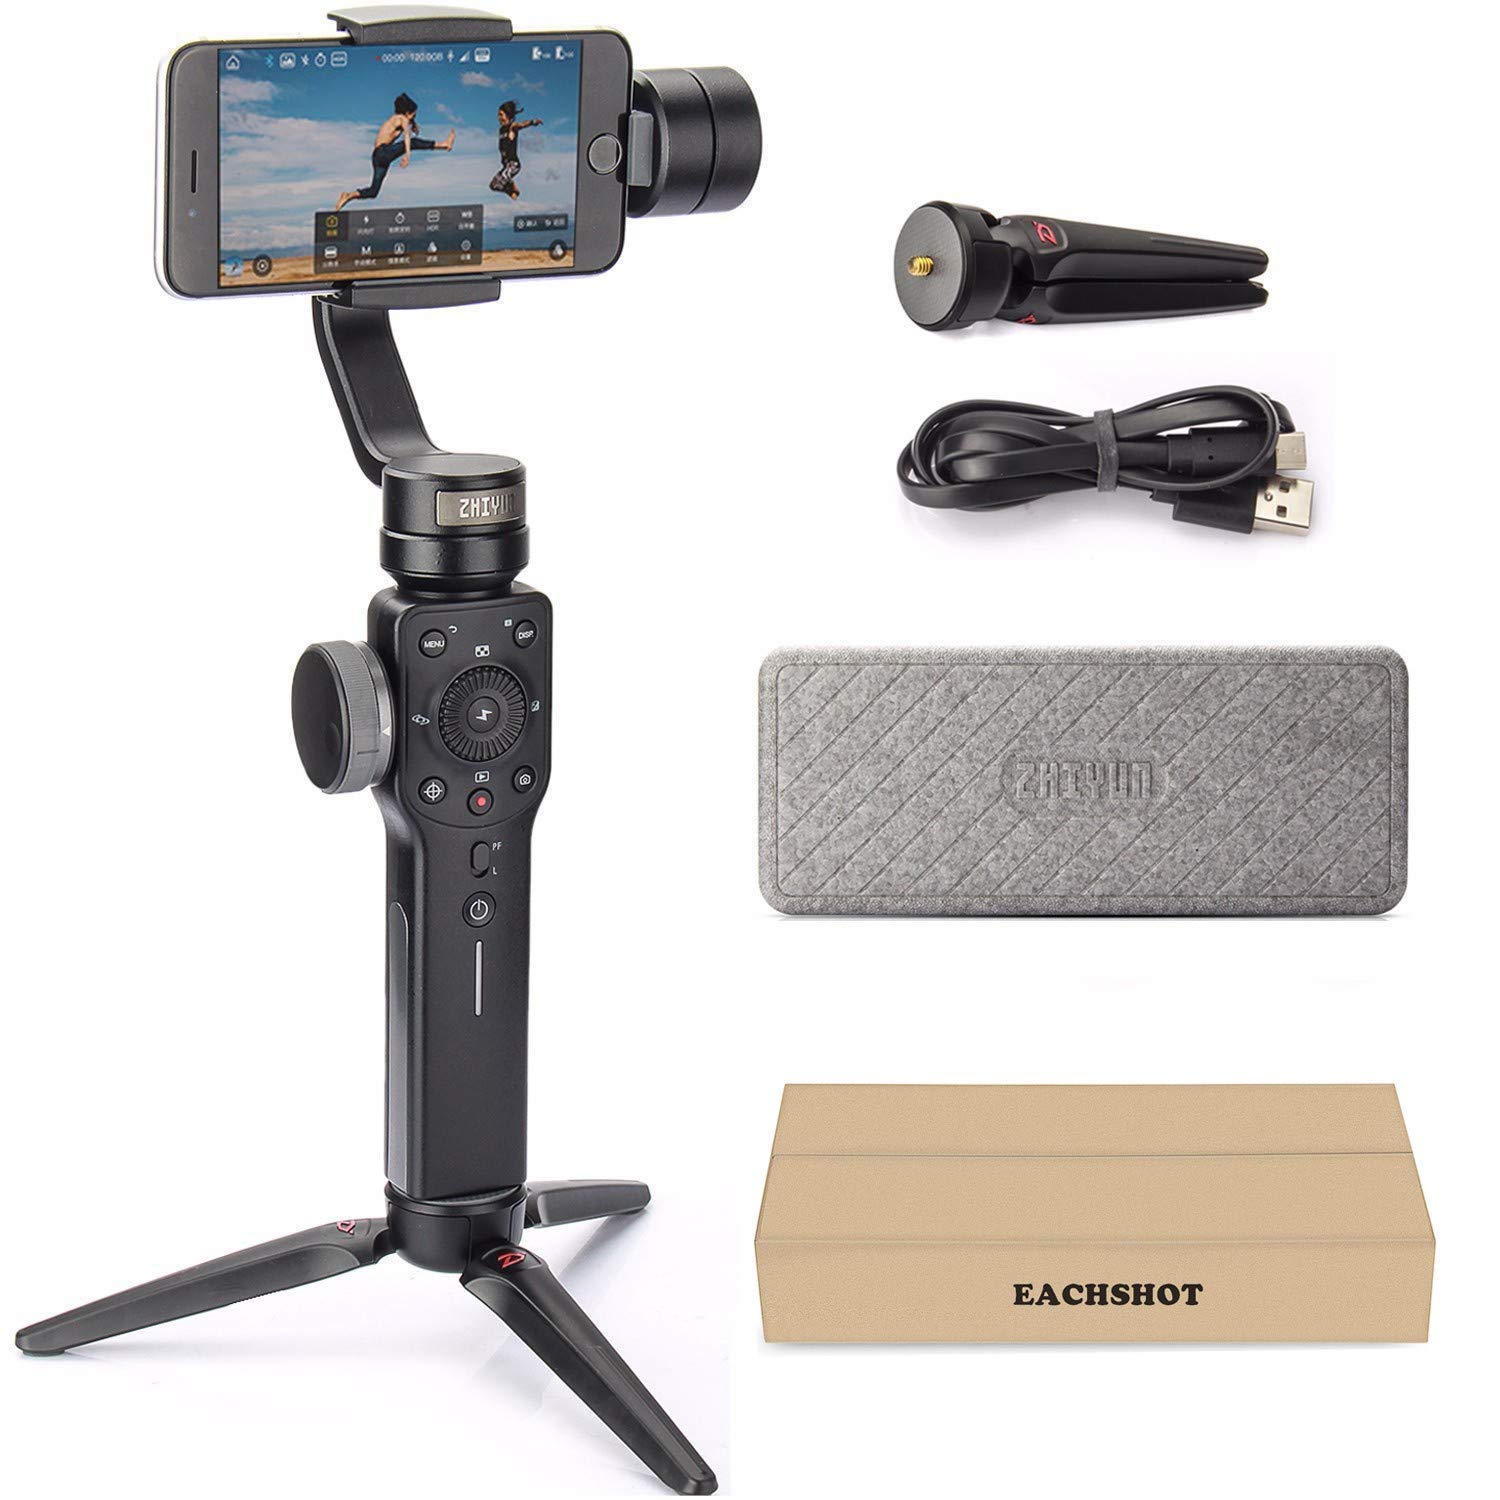 ZHIYUN SMOOTH 4 3-AXIS HANDHELD GIMBAL STABILIZER w/FOCUS PULL & ZOOM FOR IPHONE Xs Max Xr X 8 Plus 7 6 SE ANDROID SMARTPHONE SAMSUNG GALAXY S9+ S9 S8+ S8 S7 S6 Q2 Edge New Smooth-Q/III in 2018 / BLACK